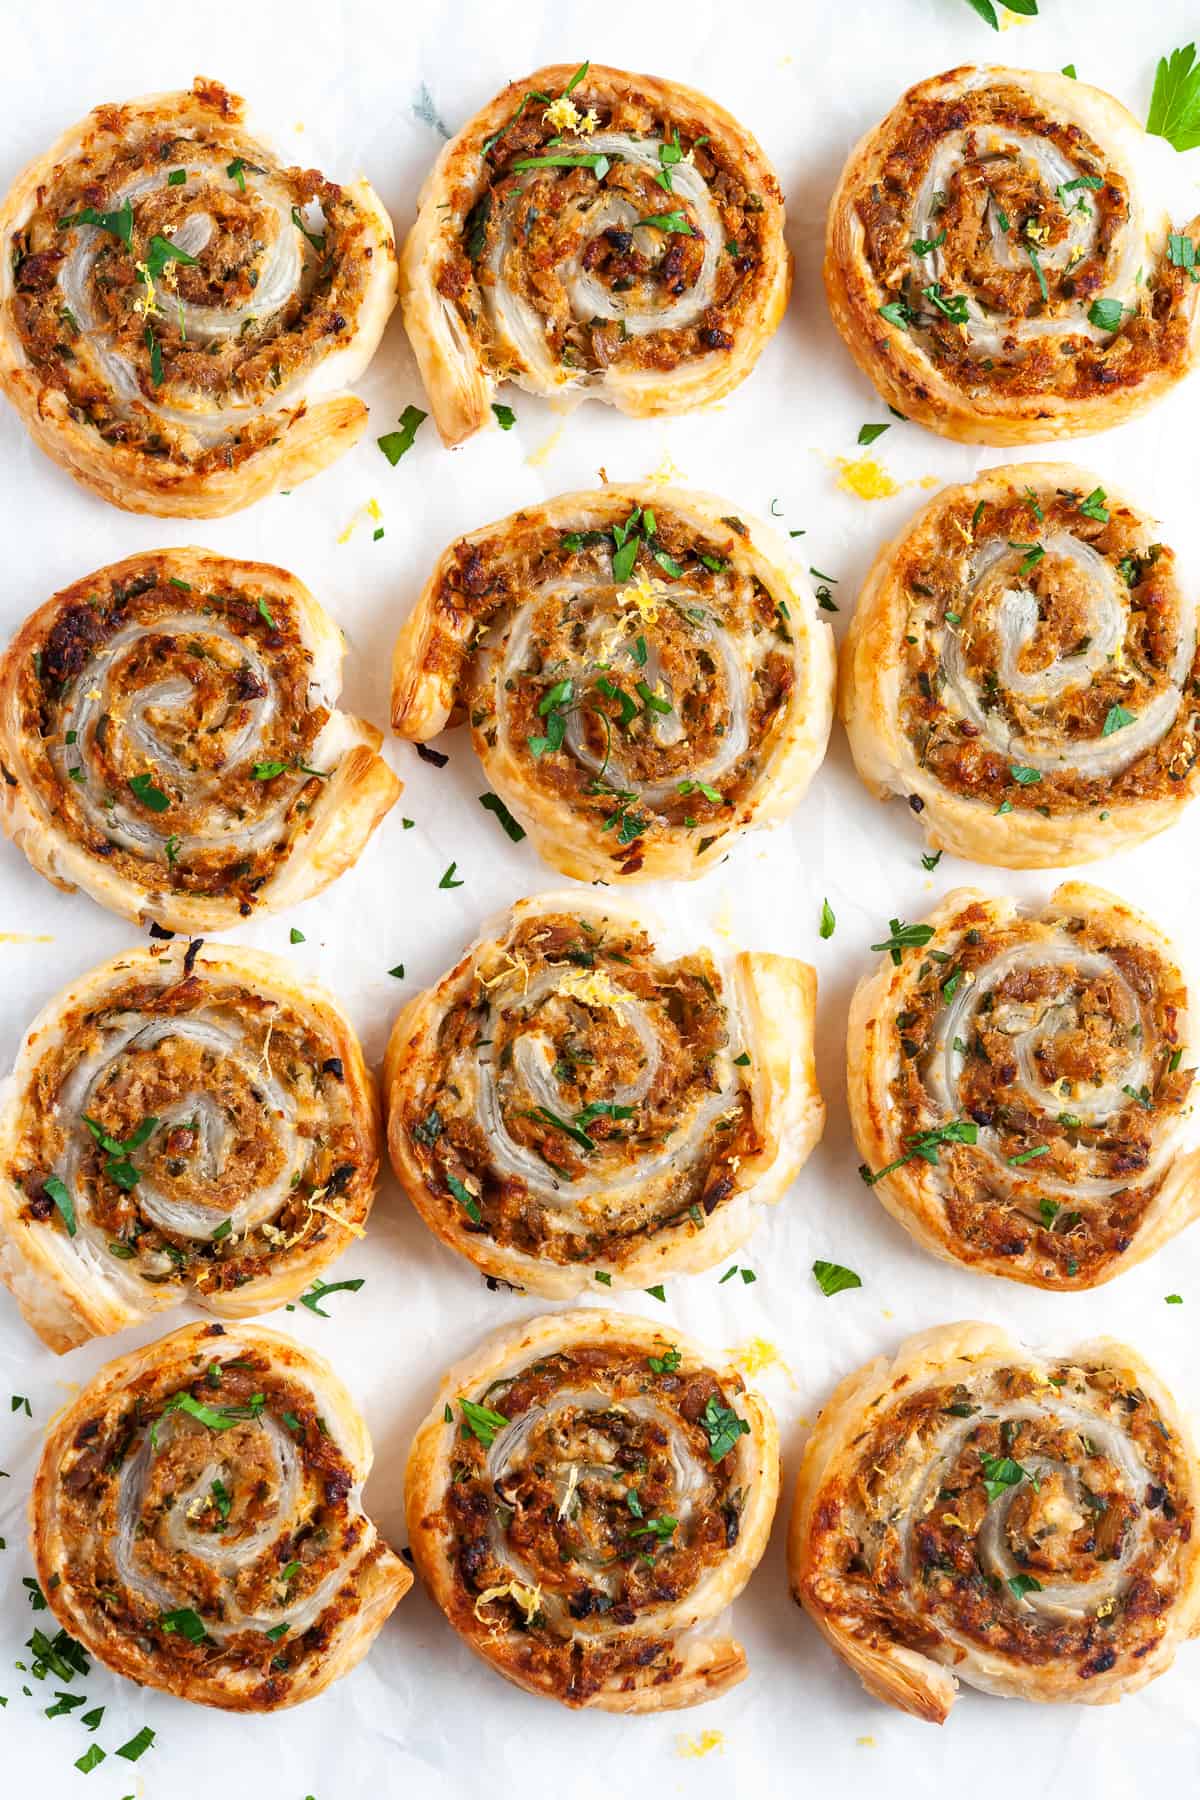 Overhead shot of cooked pinwheels on baking paper.